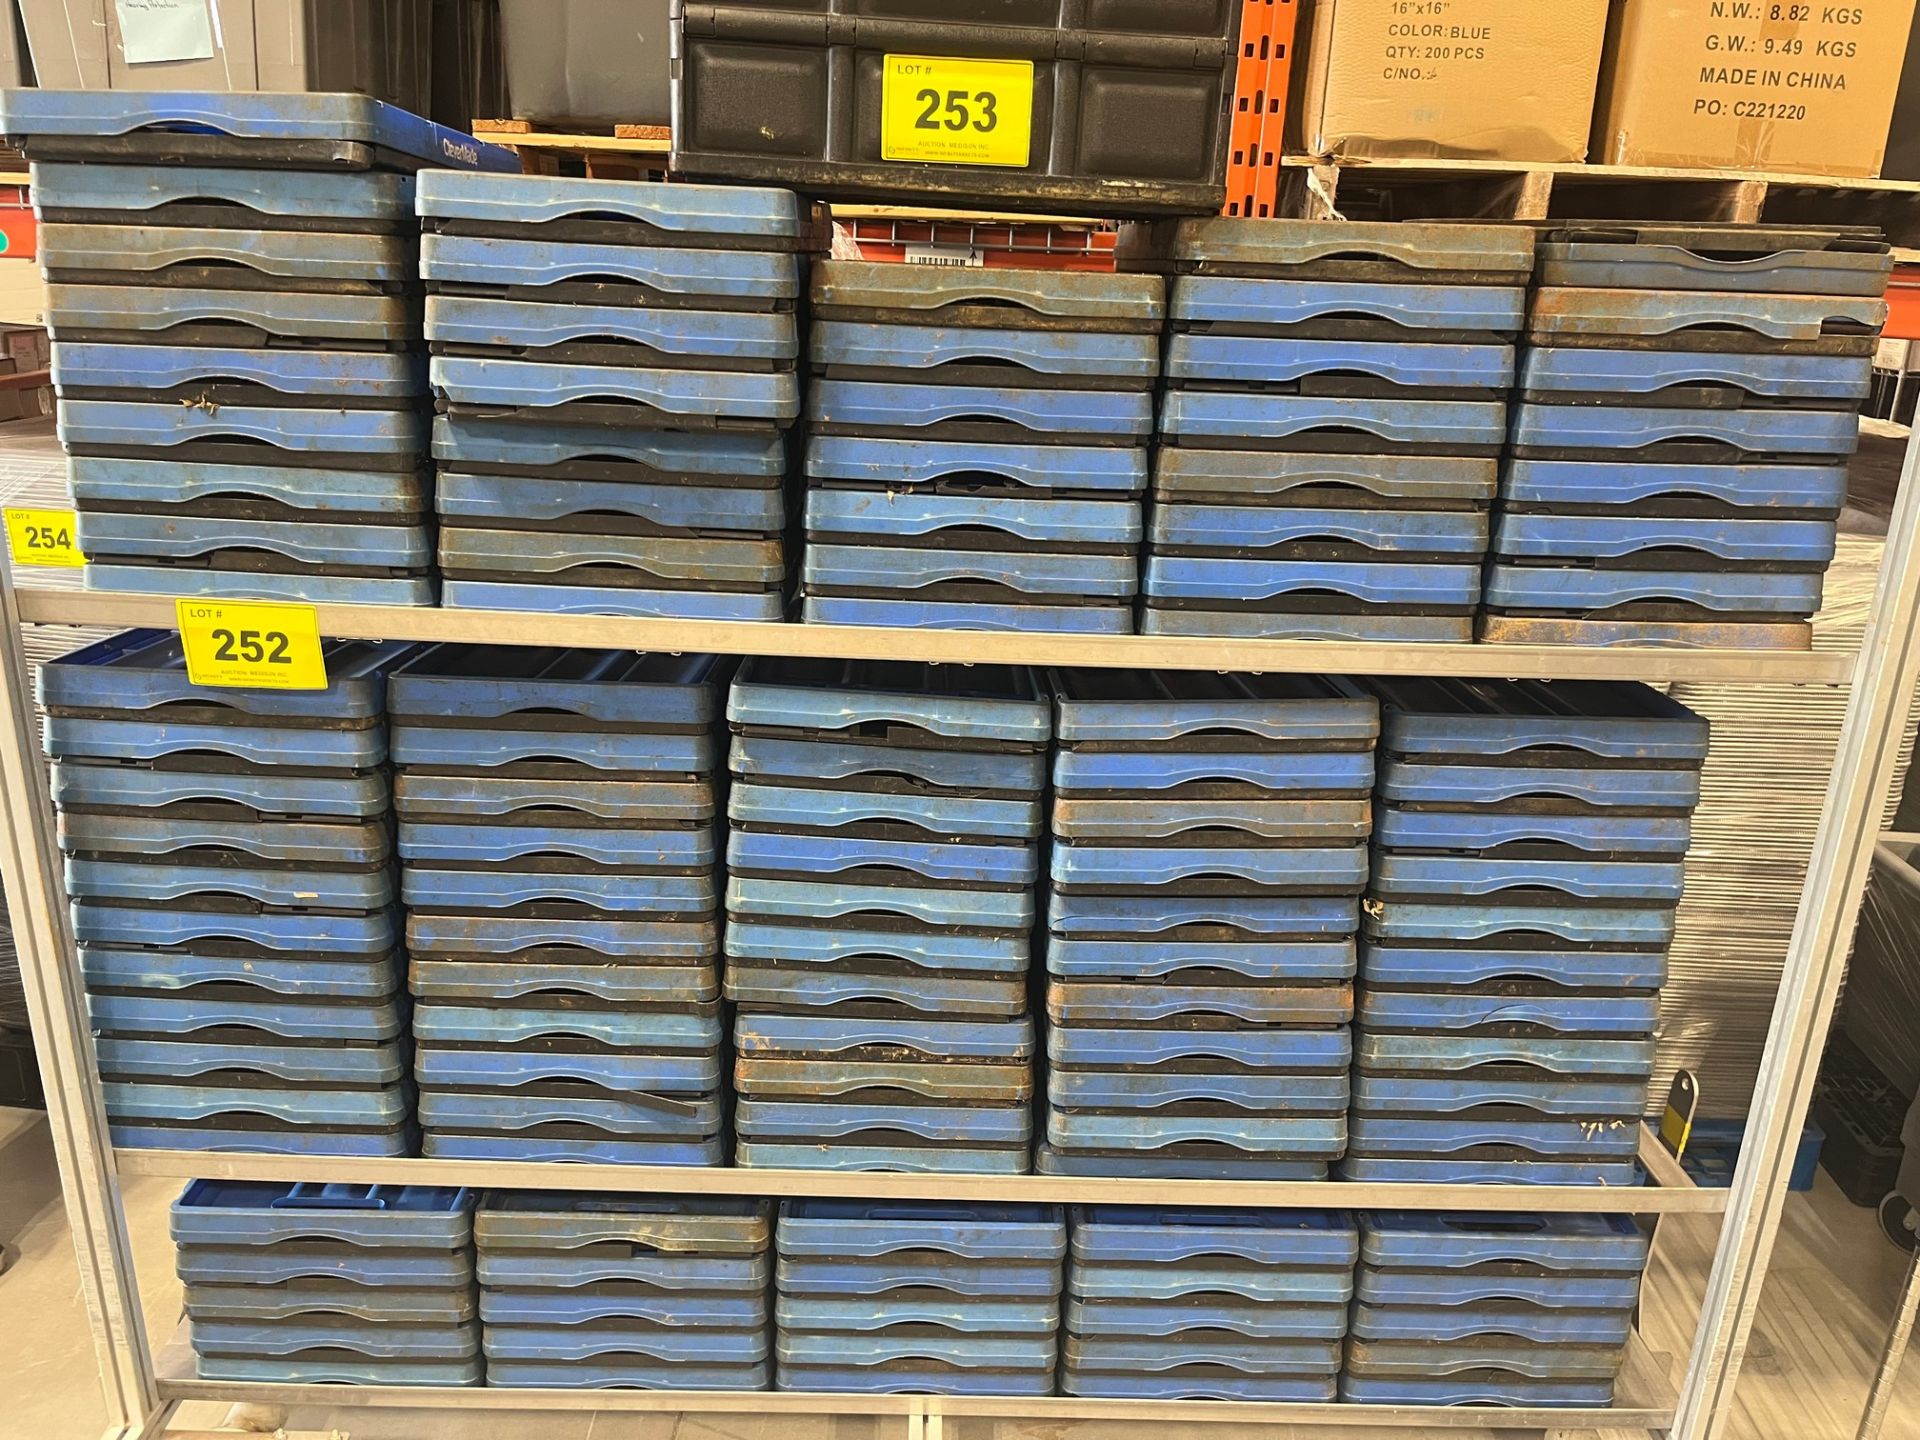 LOT OF FOLDABLE PLASTIC TOTES (APPROX. 121 TOTAL) (NO CART) - Image 2 of 2